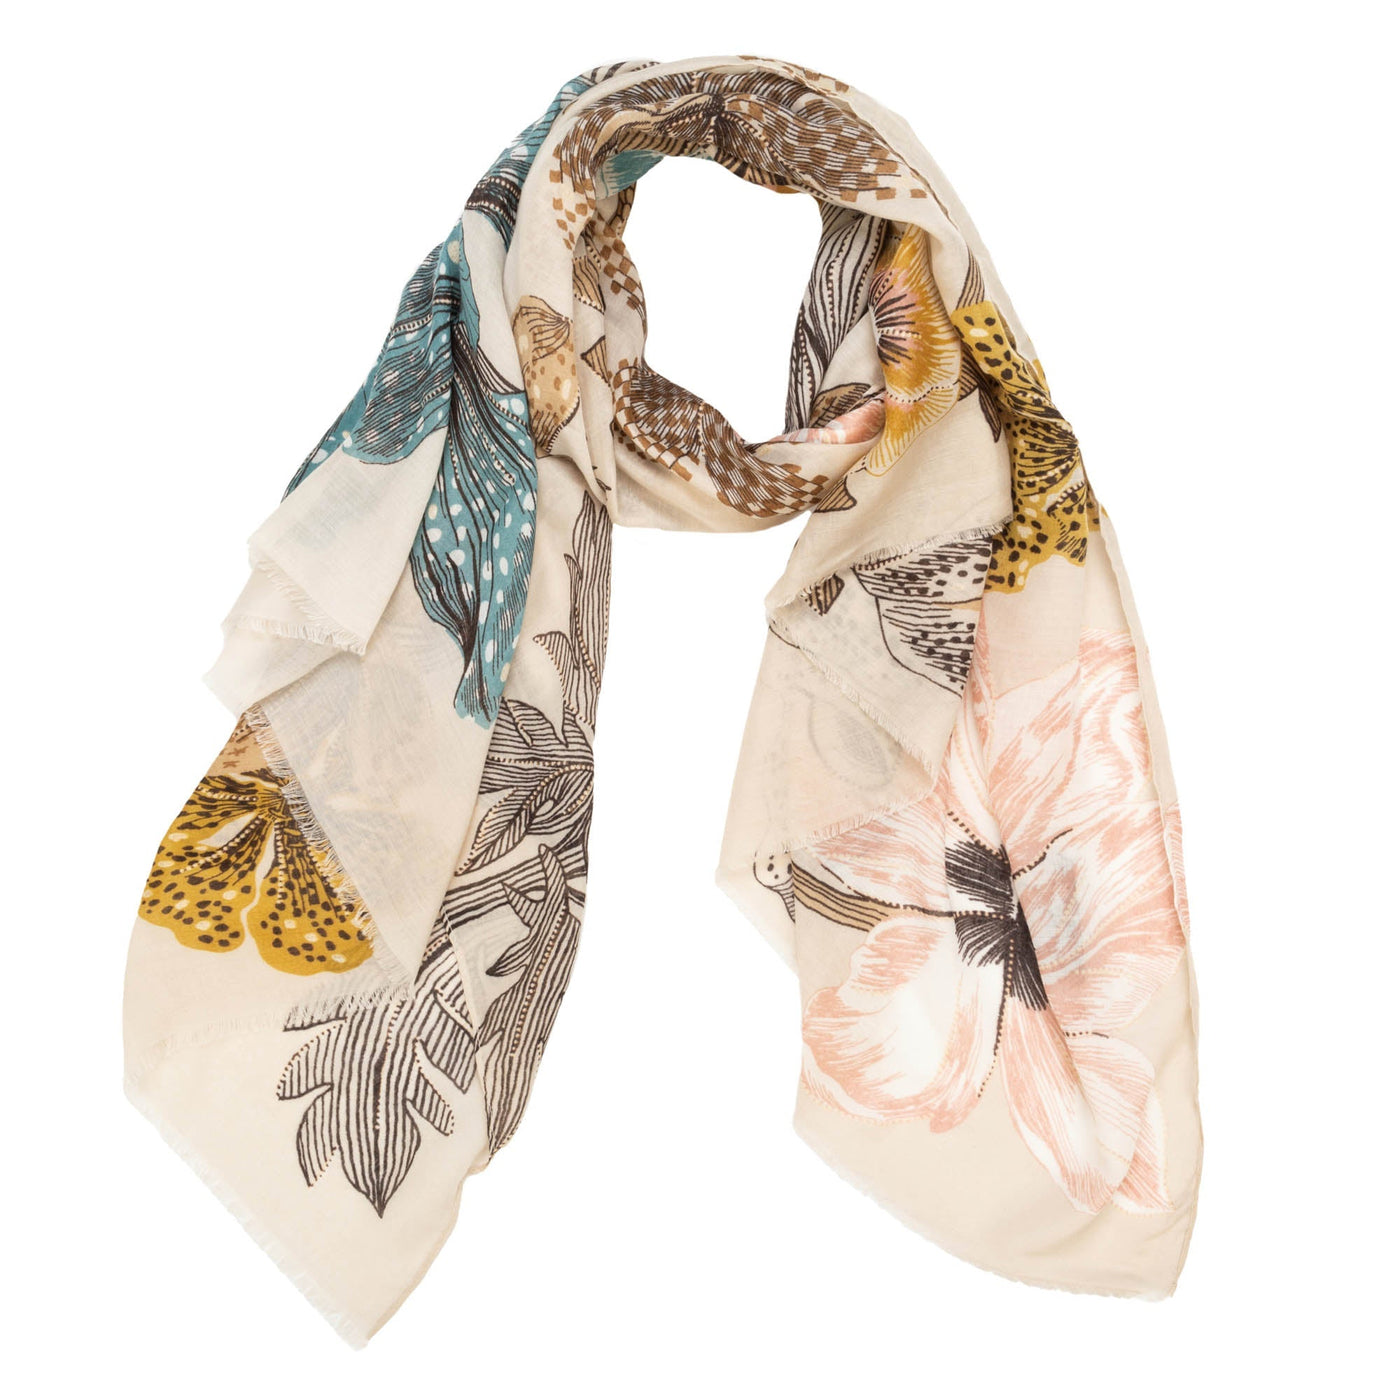 SCARF - Wild And Free - Light Weight Woven Floral Scarf